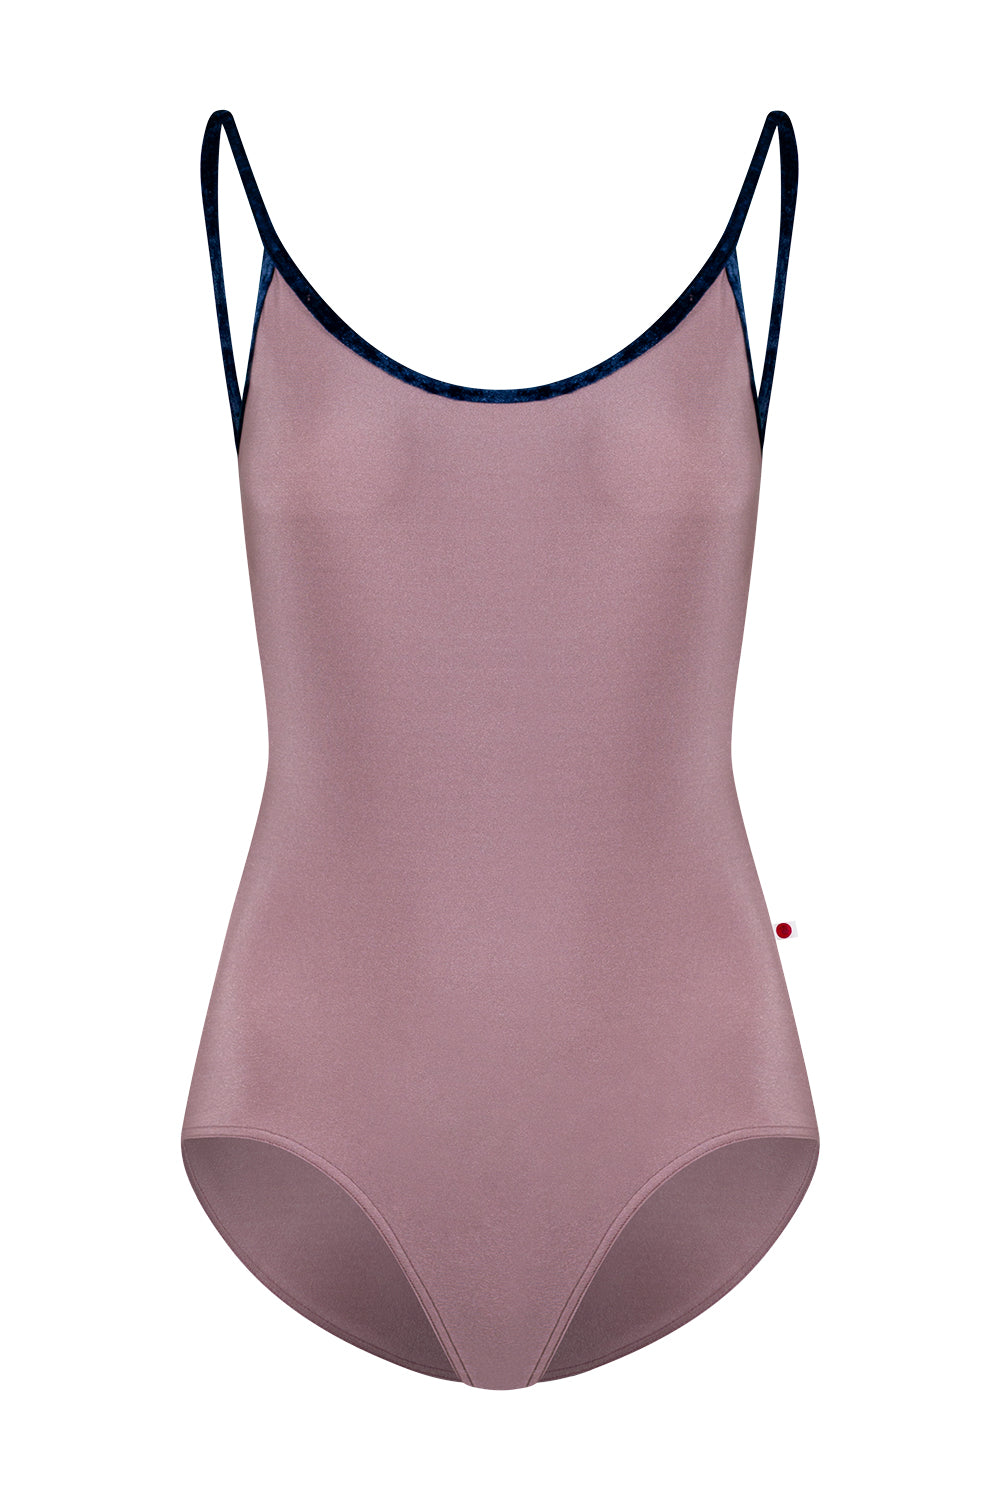 Fiona leotard in N-Magic body color with Mesh Rose top color and CV-Dark Blue trim color